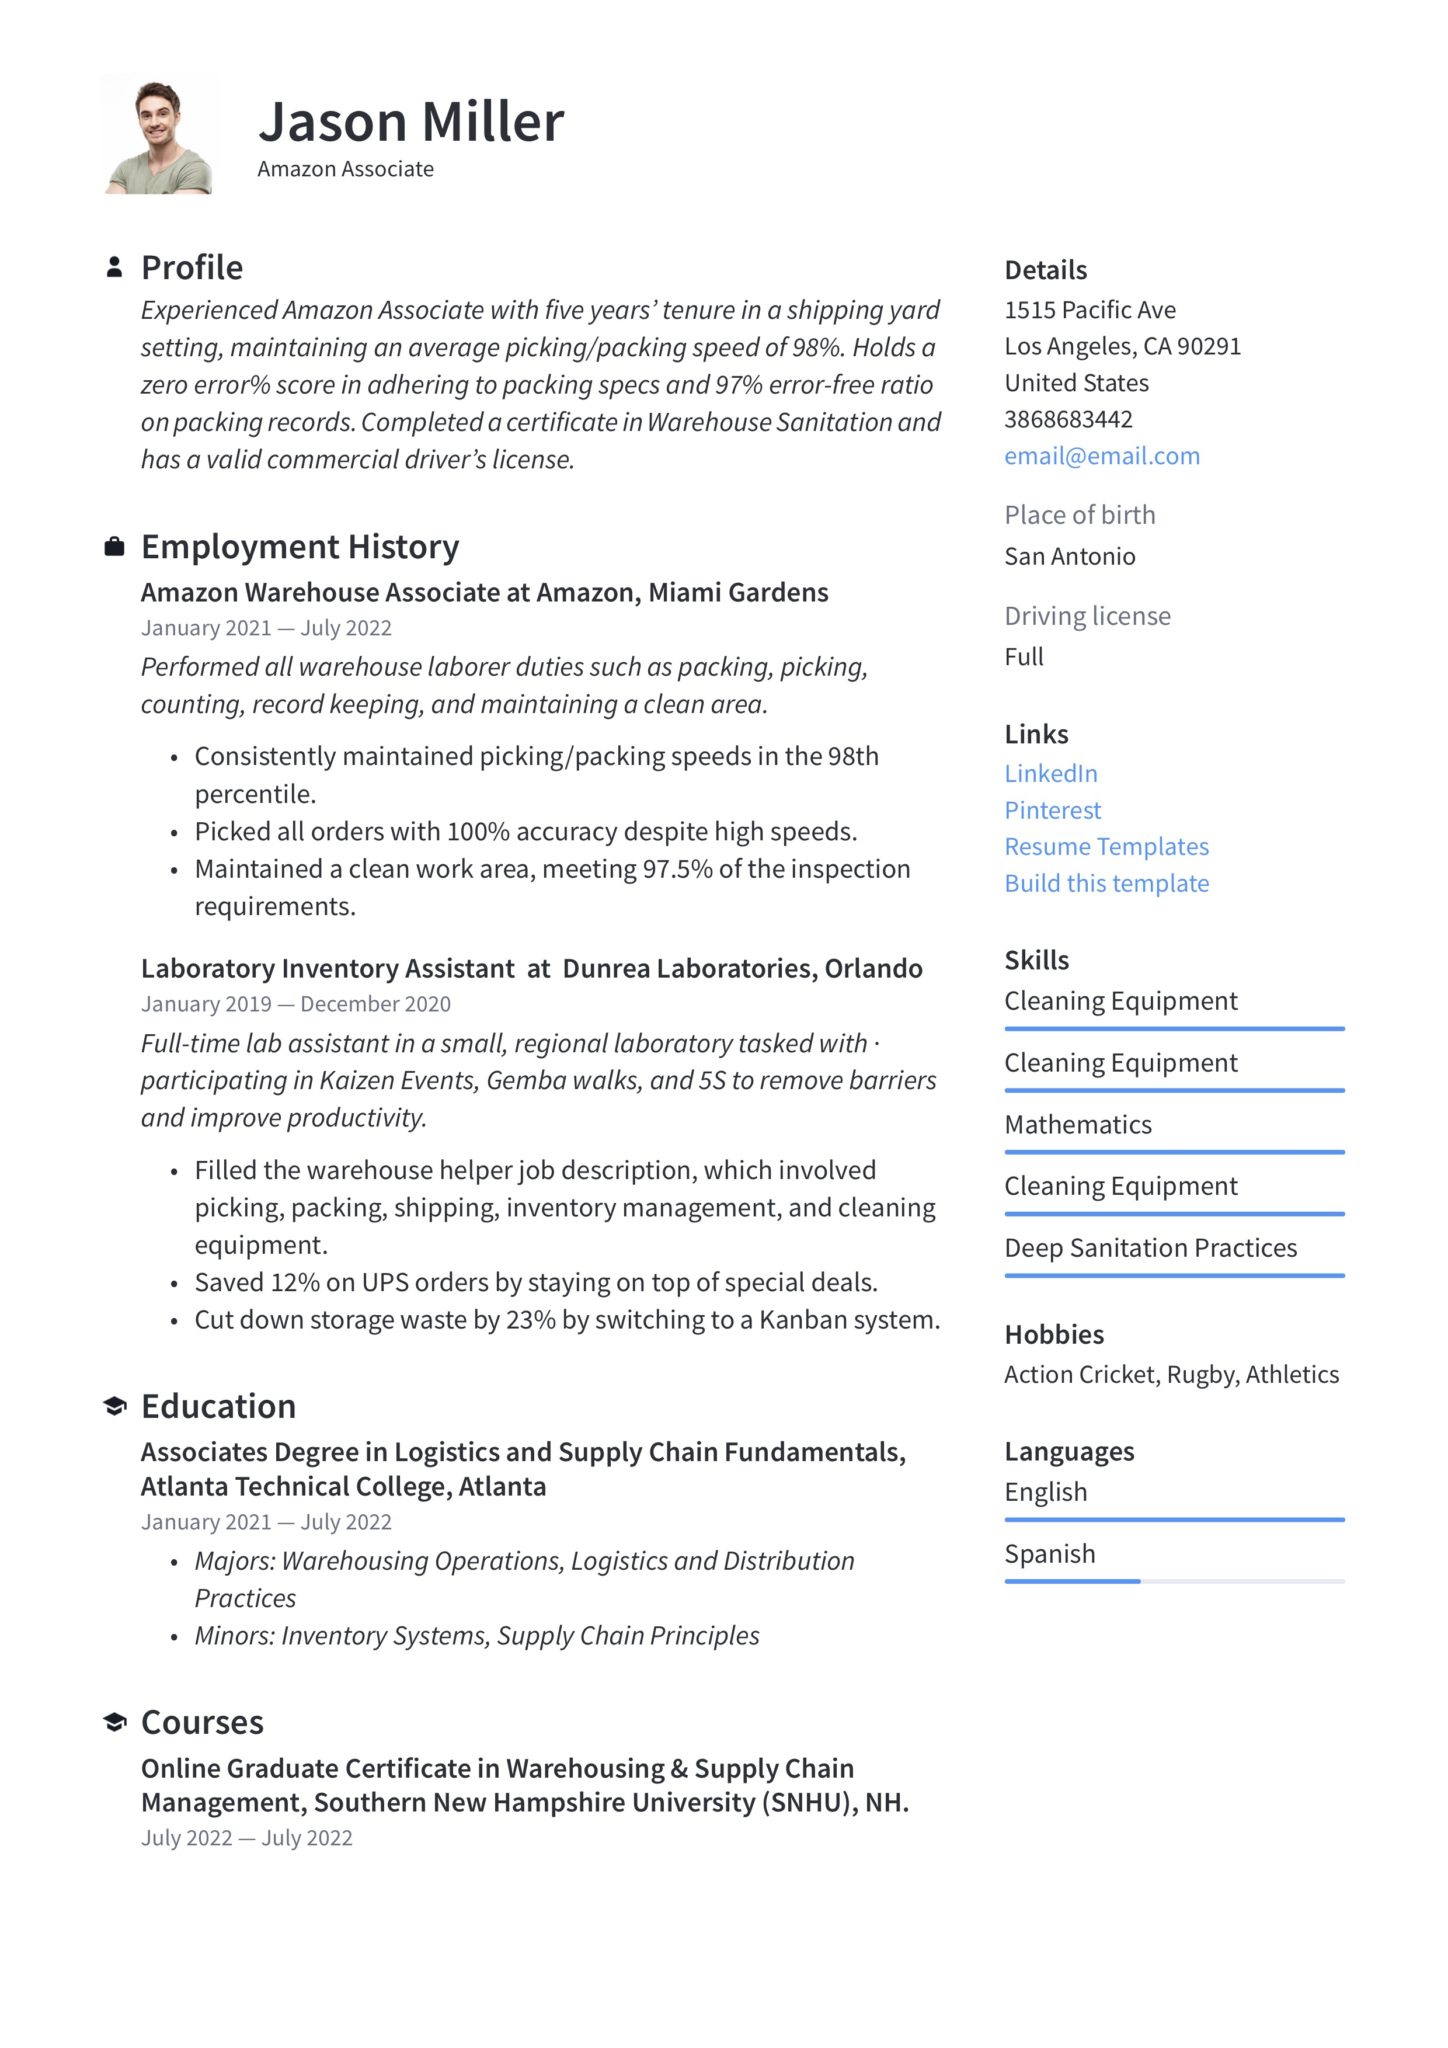 30825I will write professional resume cover letter and linkedin